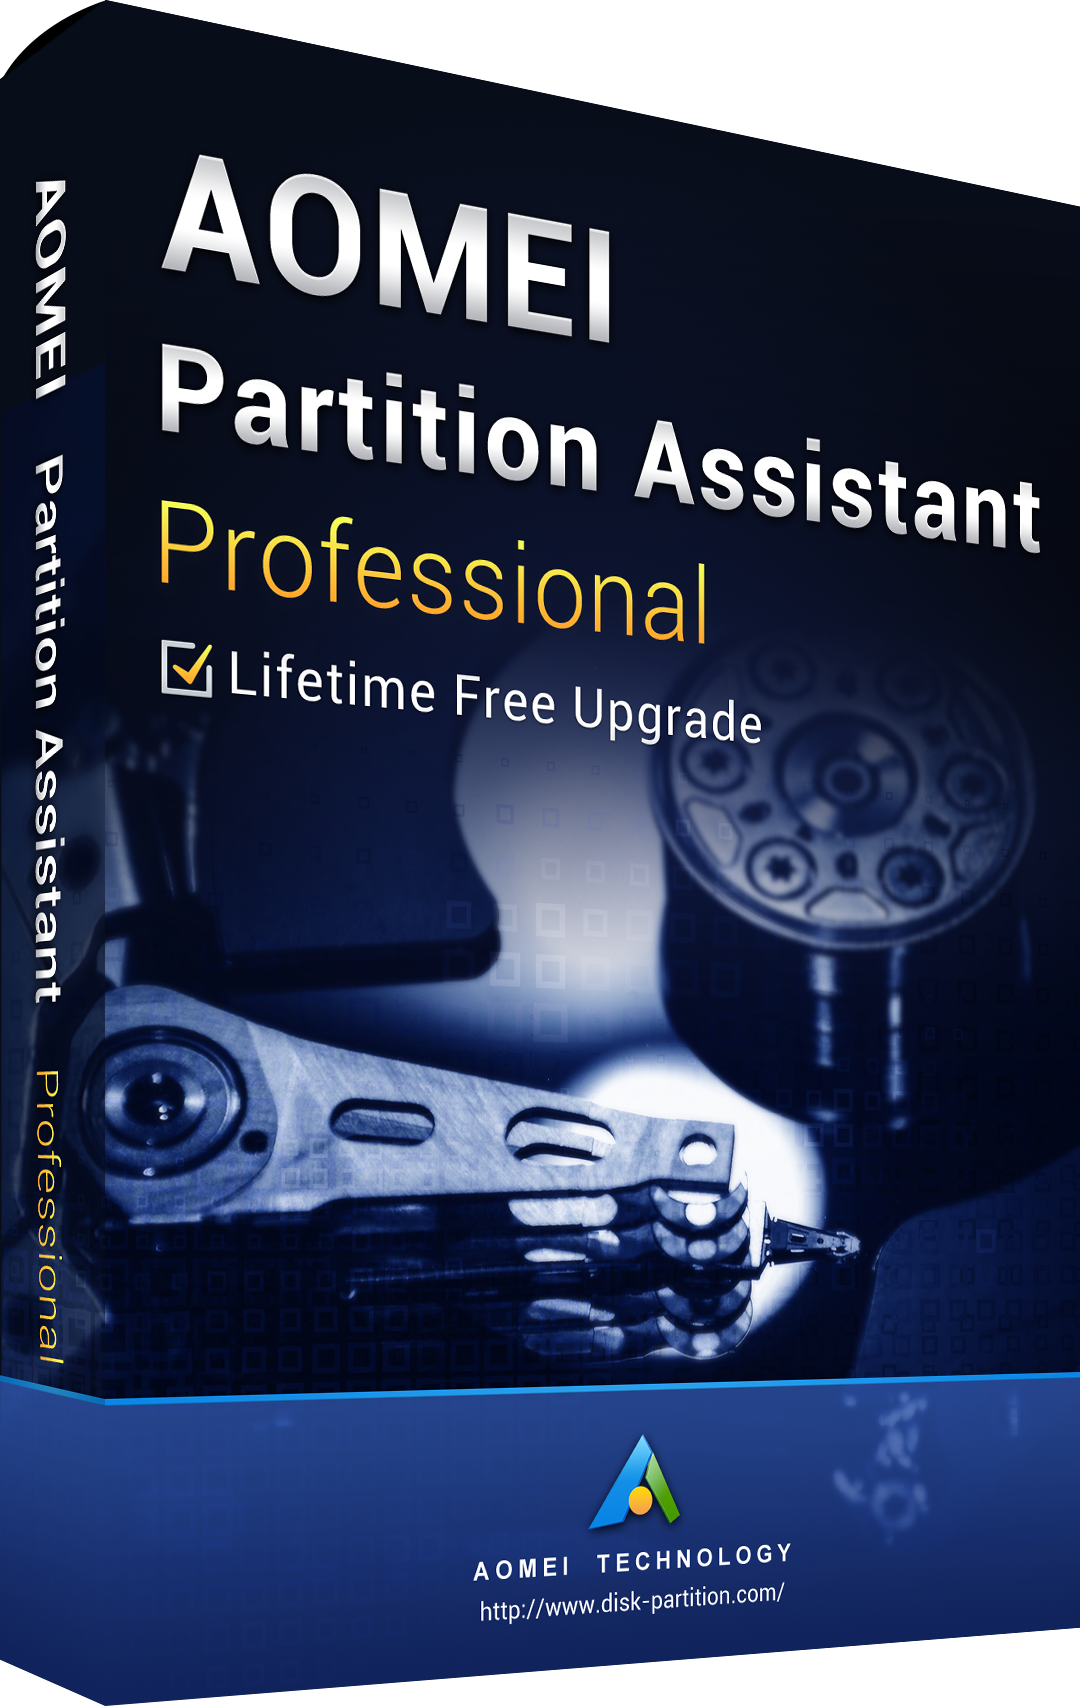 "AOMEI Partition Assistant Professional" - Image of software interface displaying partition management tools and features.